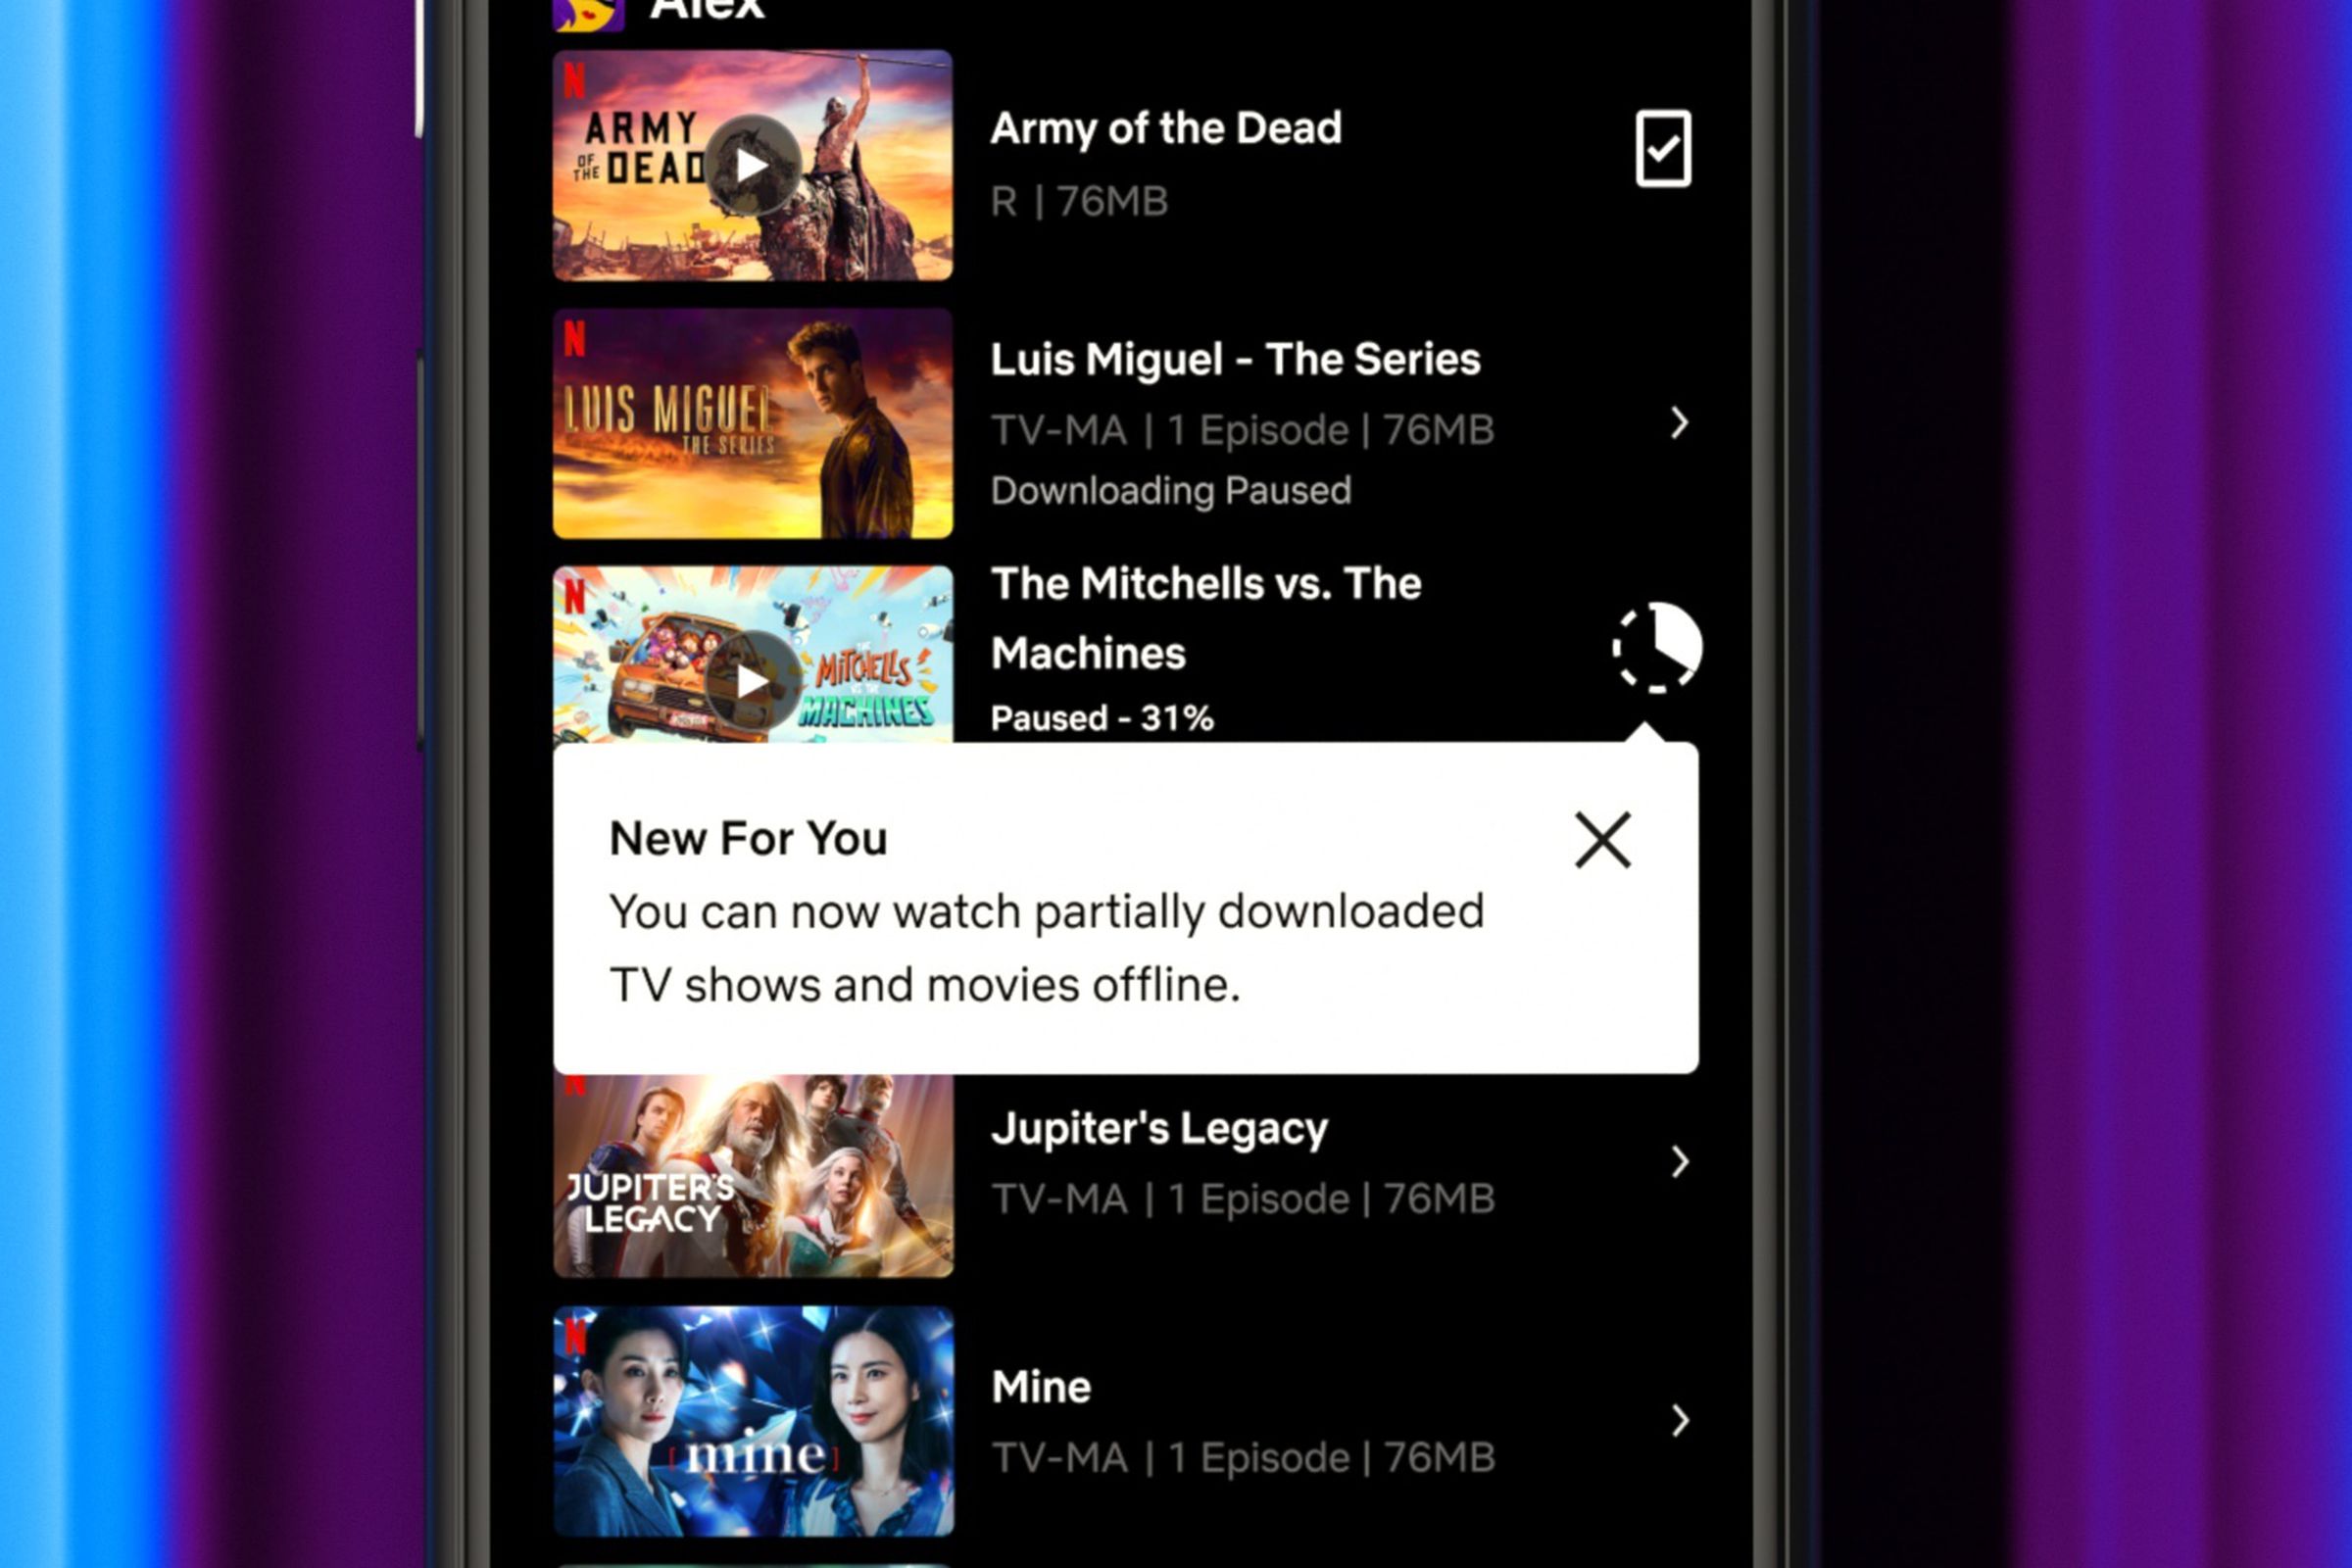 Netflix’s partial downloads feature displayed on a mobile device.